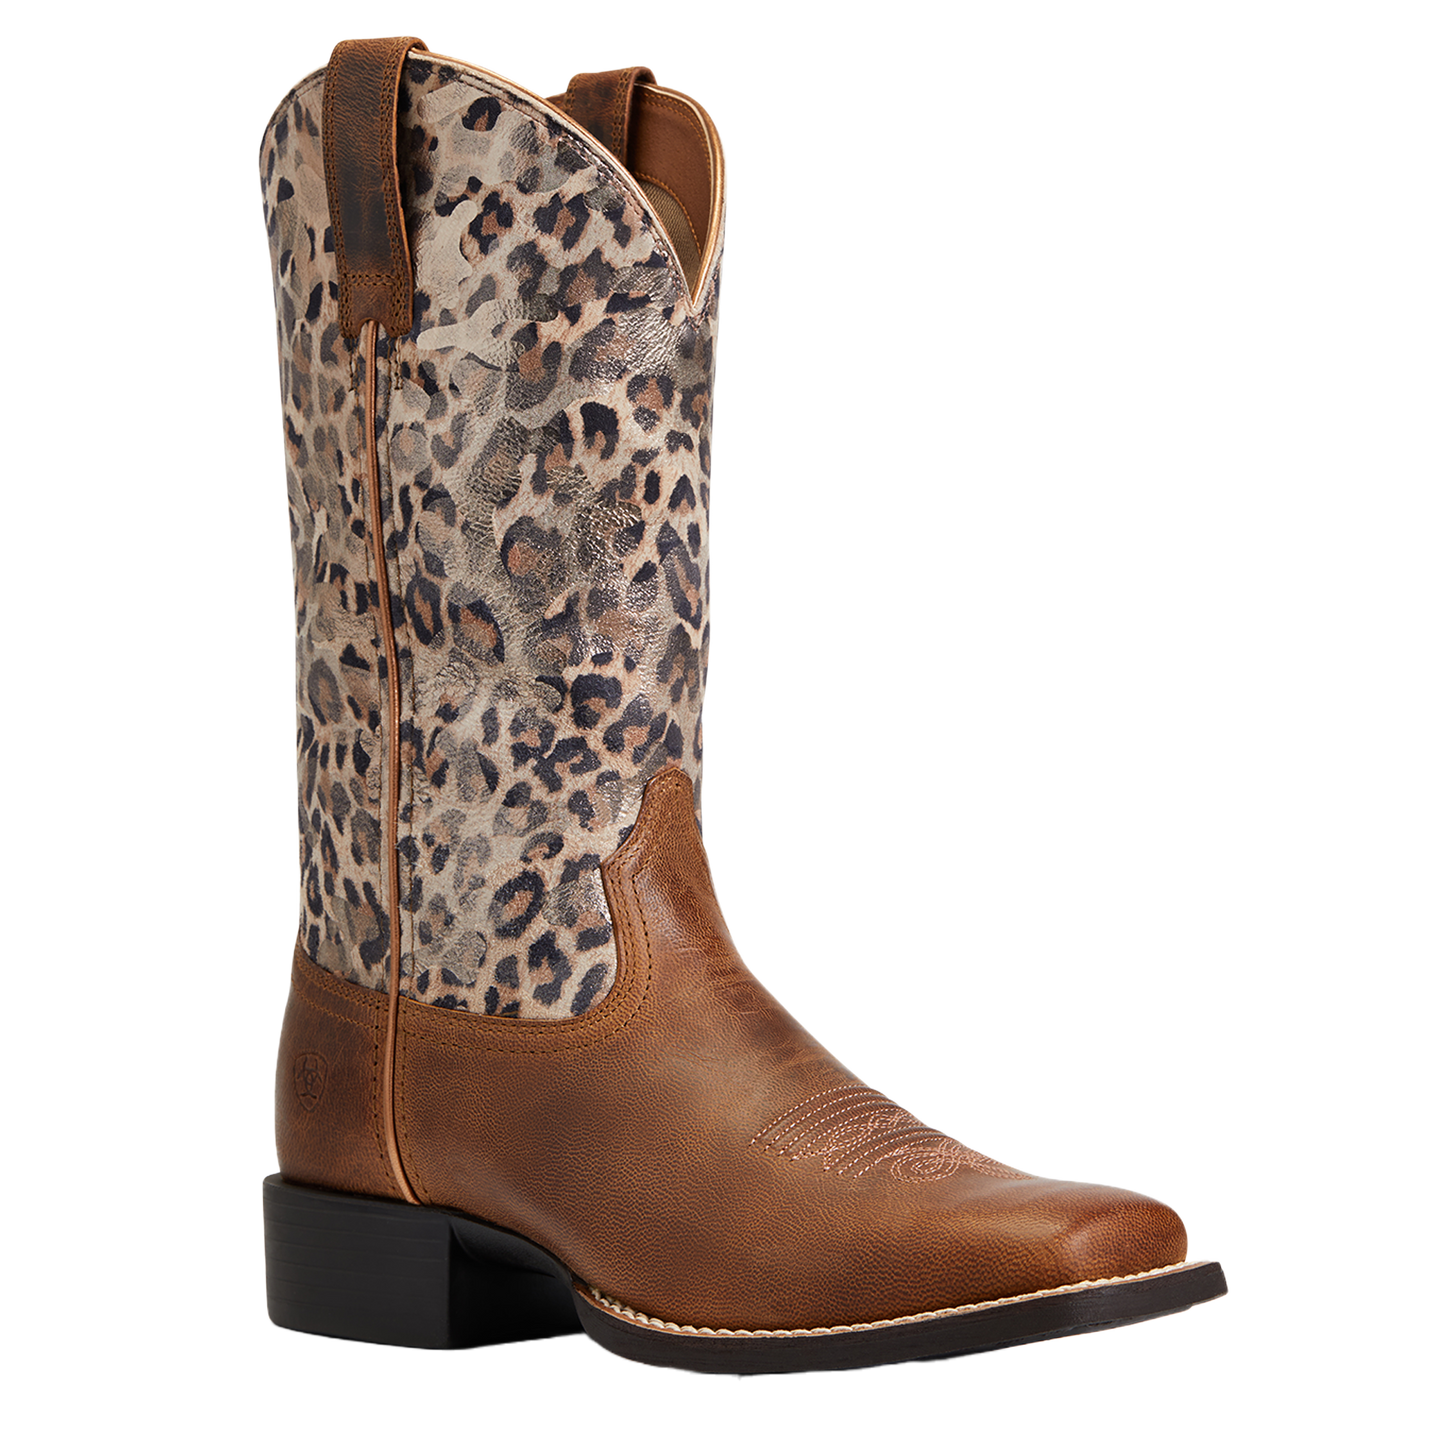 Ariat Ladies Round Up Pearl Brown & Leopard Wide Square 10040363